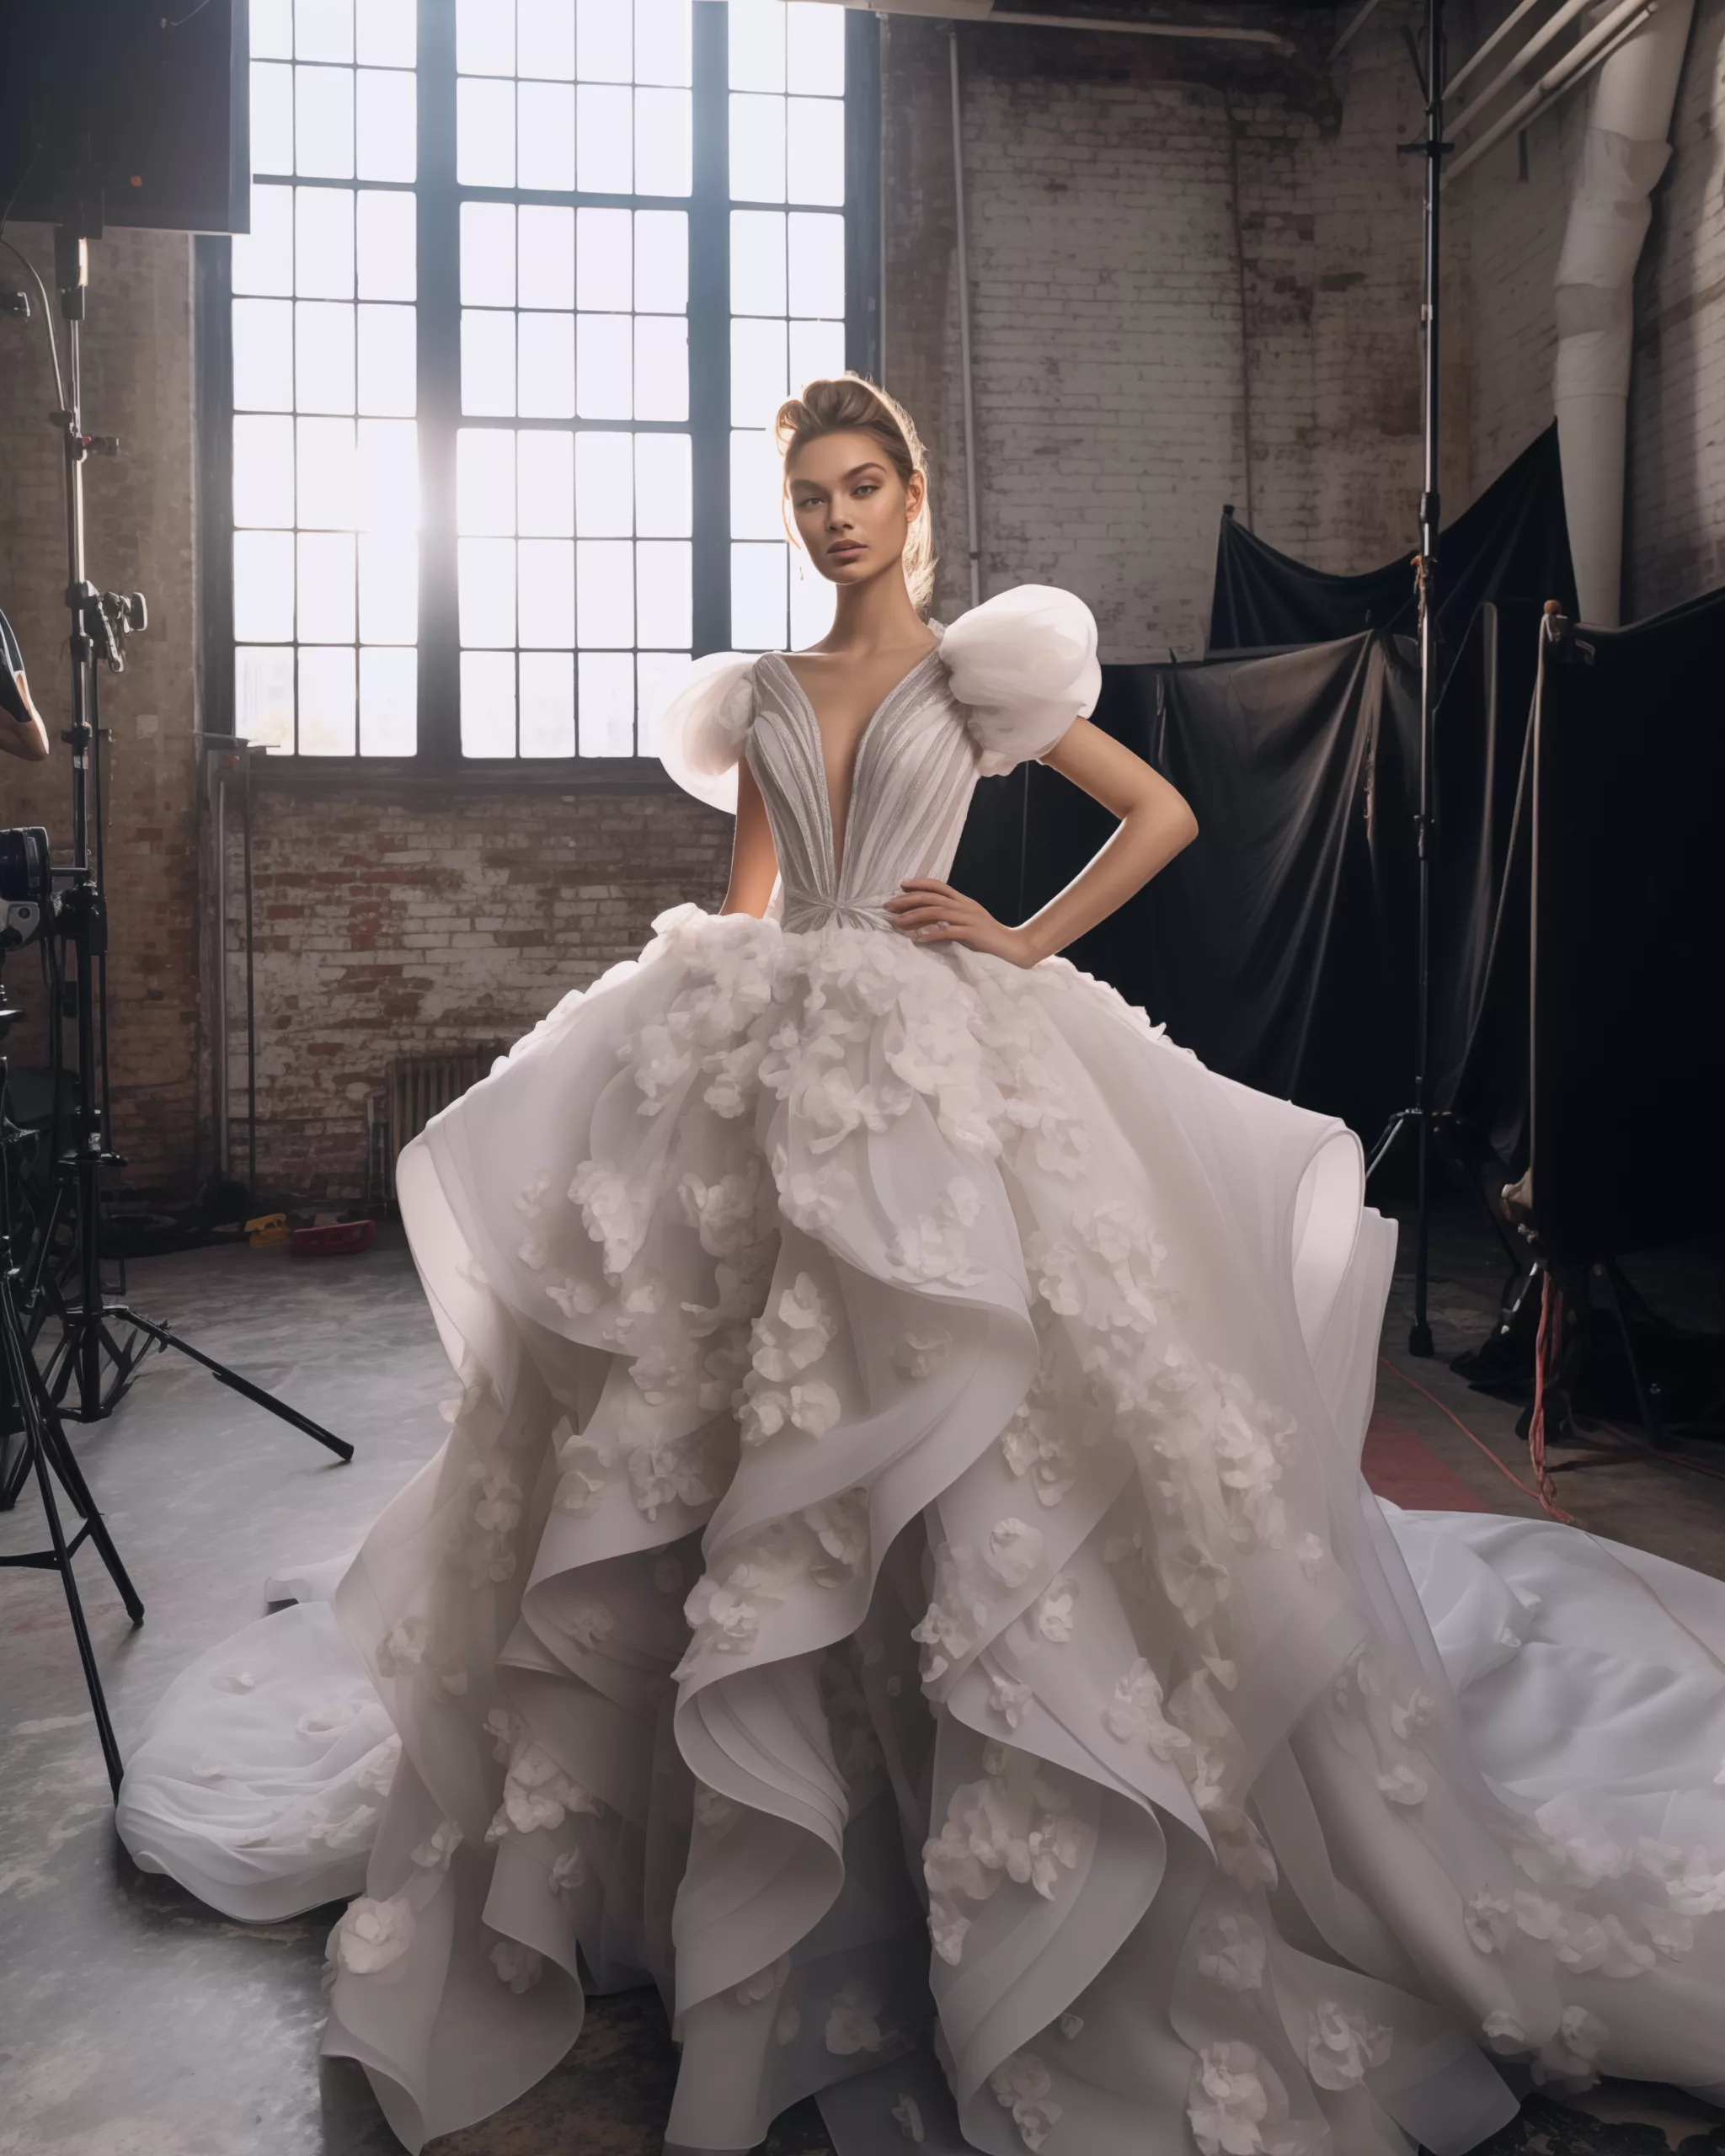 3-Minute Hacks - A guide to different types of wedding gowns | Facebook